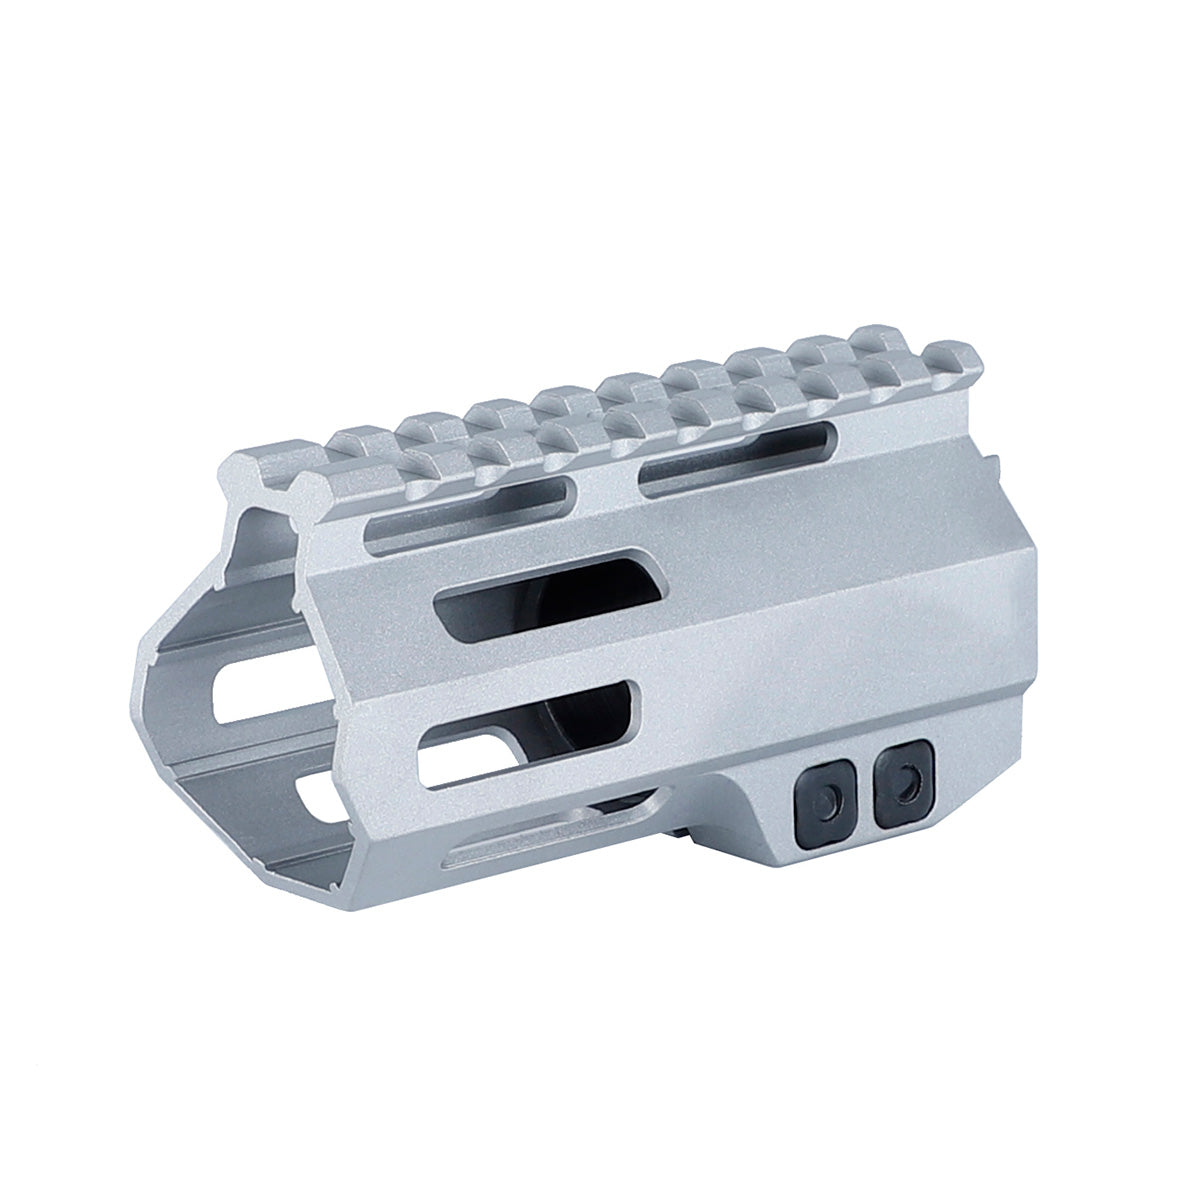 Unbranded AR-15 Raw 4 inch M-lok Handguard Free Float, Silver Color